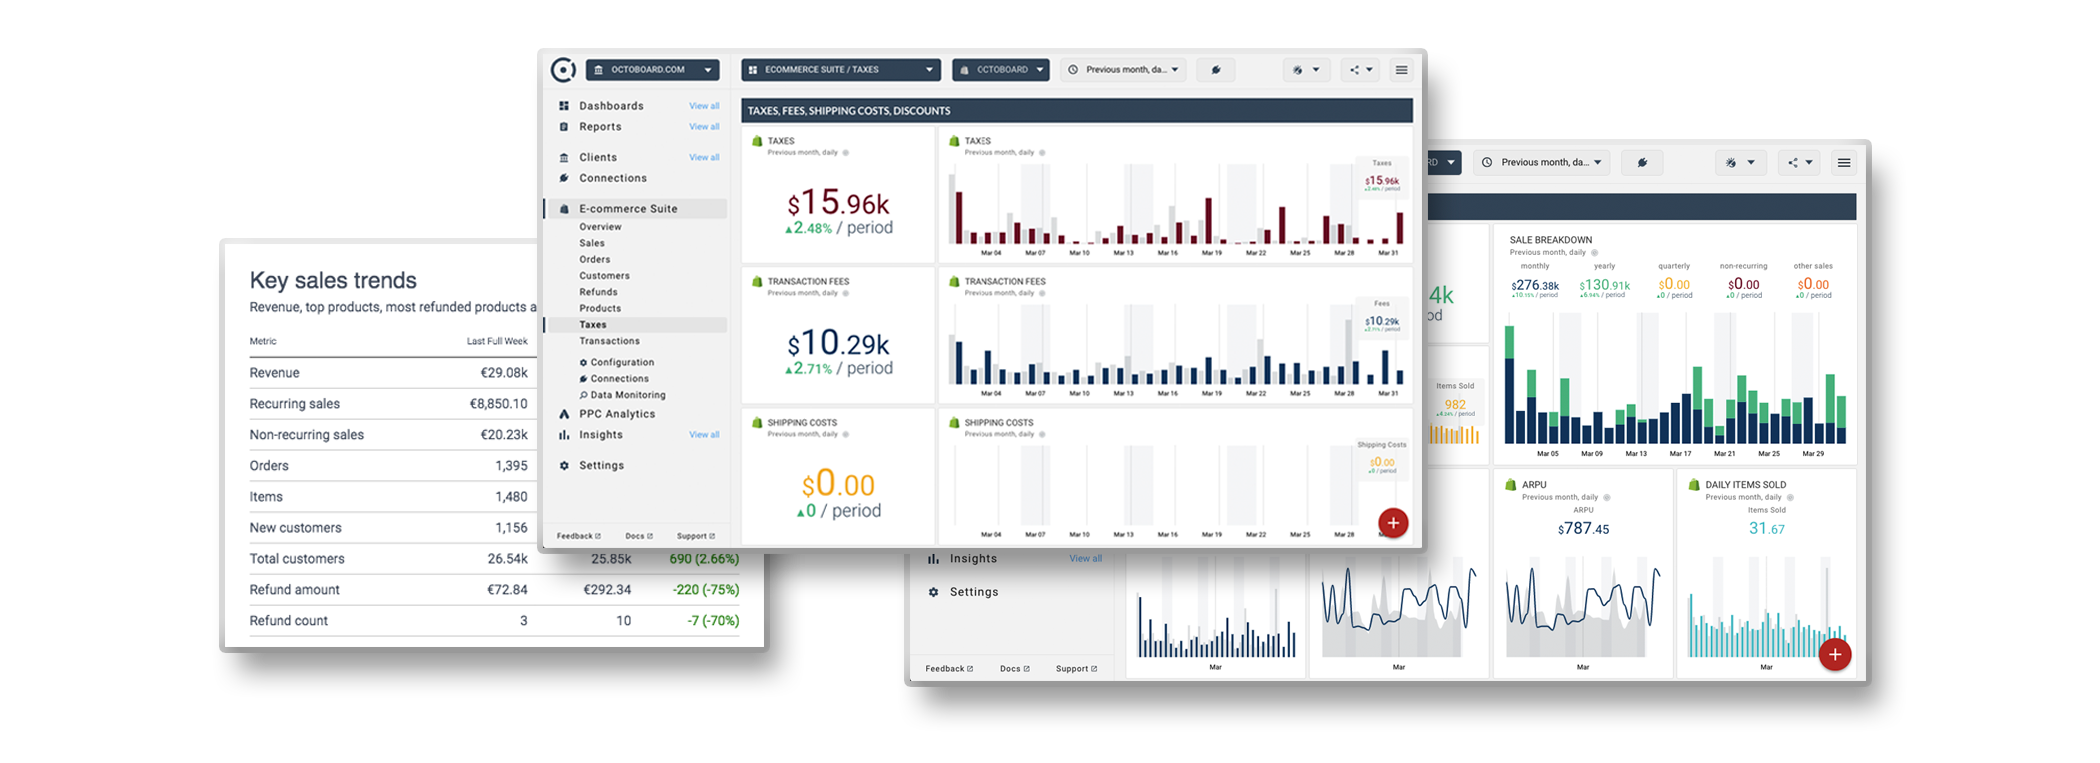 Business Performance Dashboards For Startups